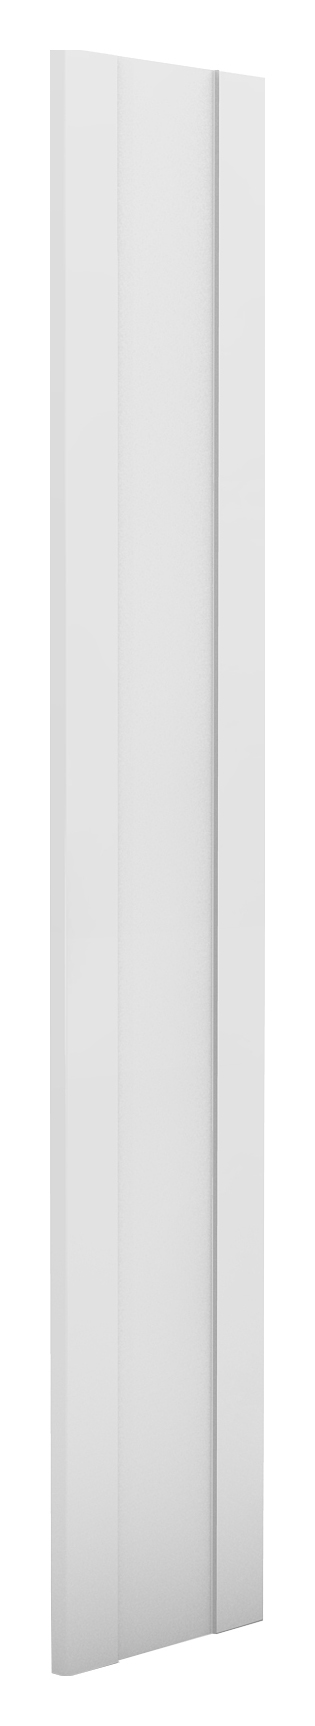 Image of Duarti By Calypso Matt White Highwood Tall Wall End / Infill Panel - 220 x 1222 x 18mm